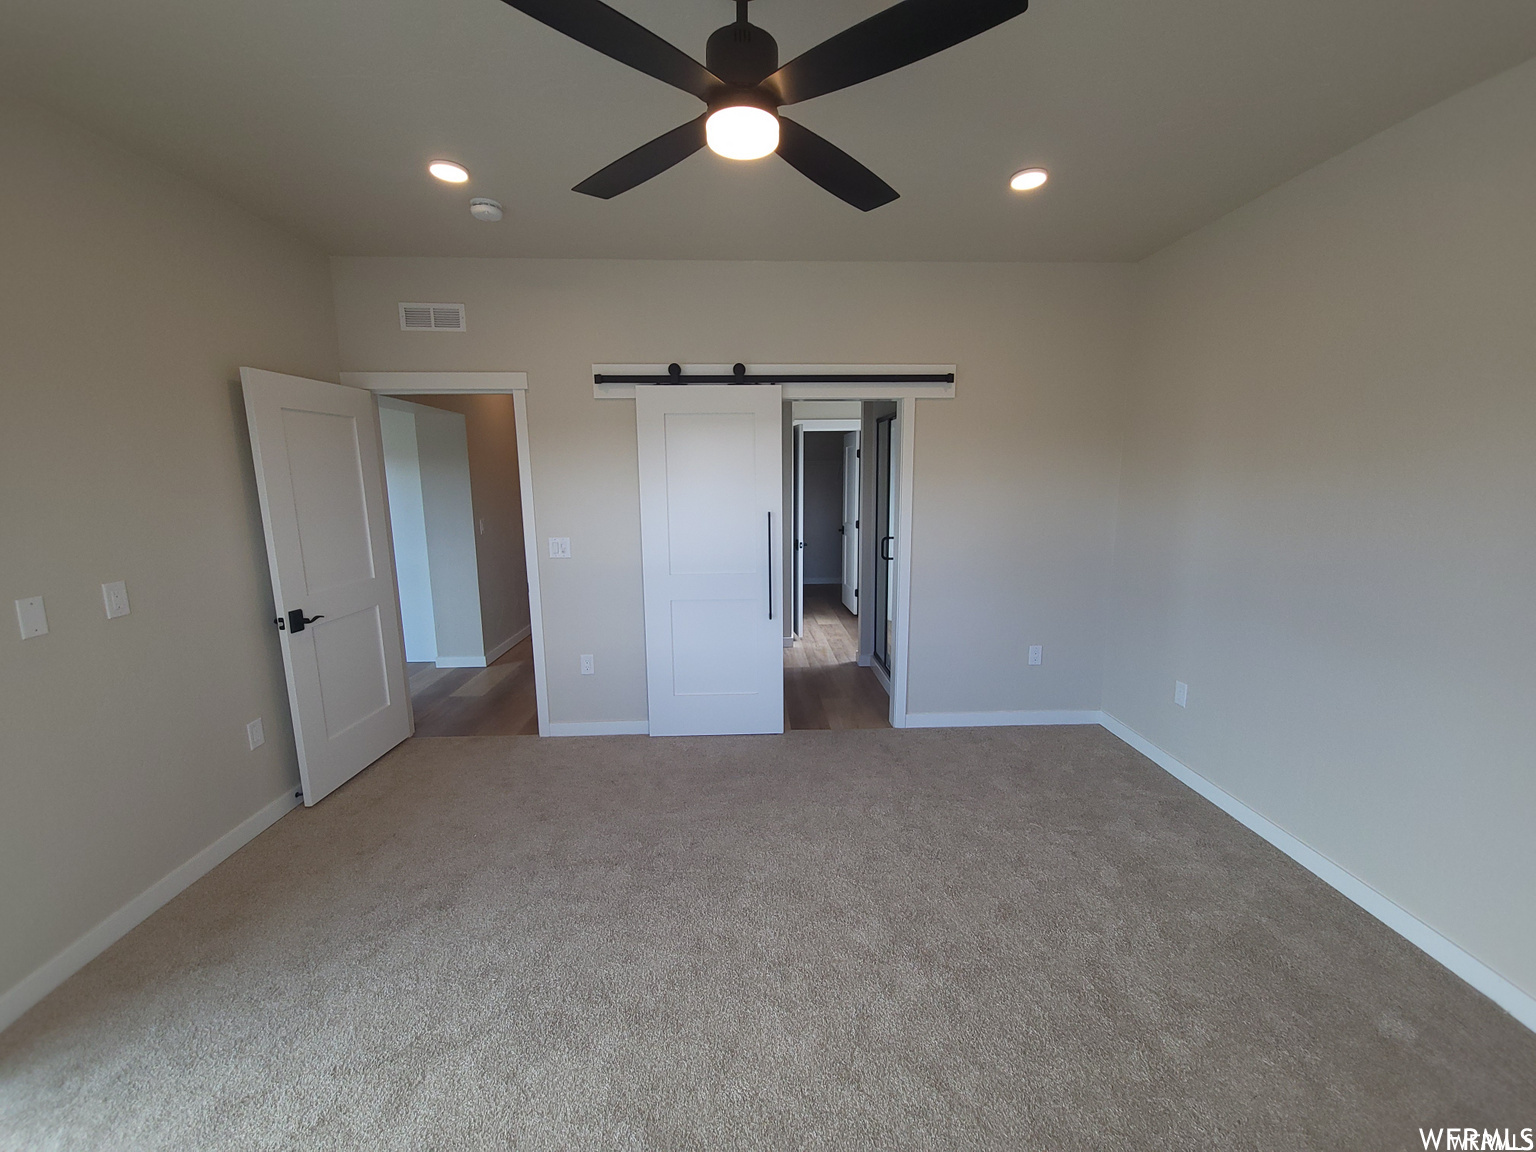 Carpeted bedroom featuring a ceiling fan